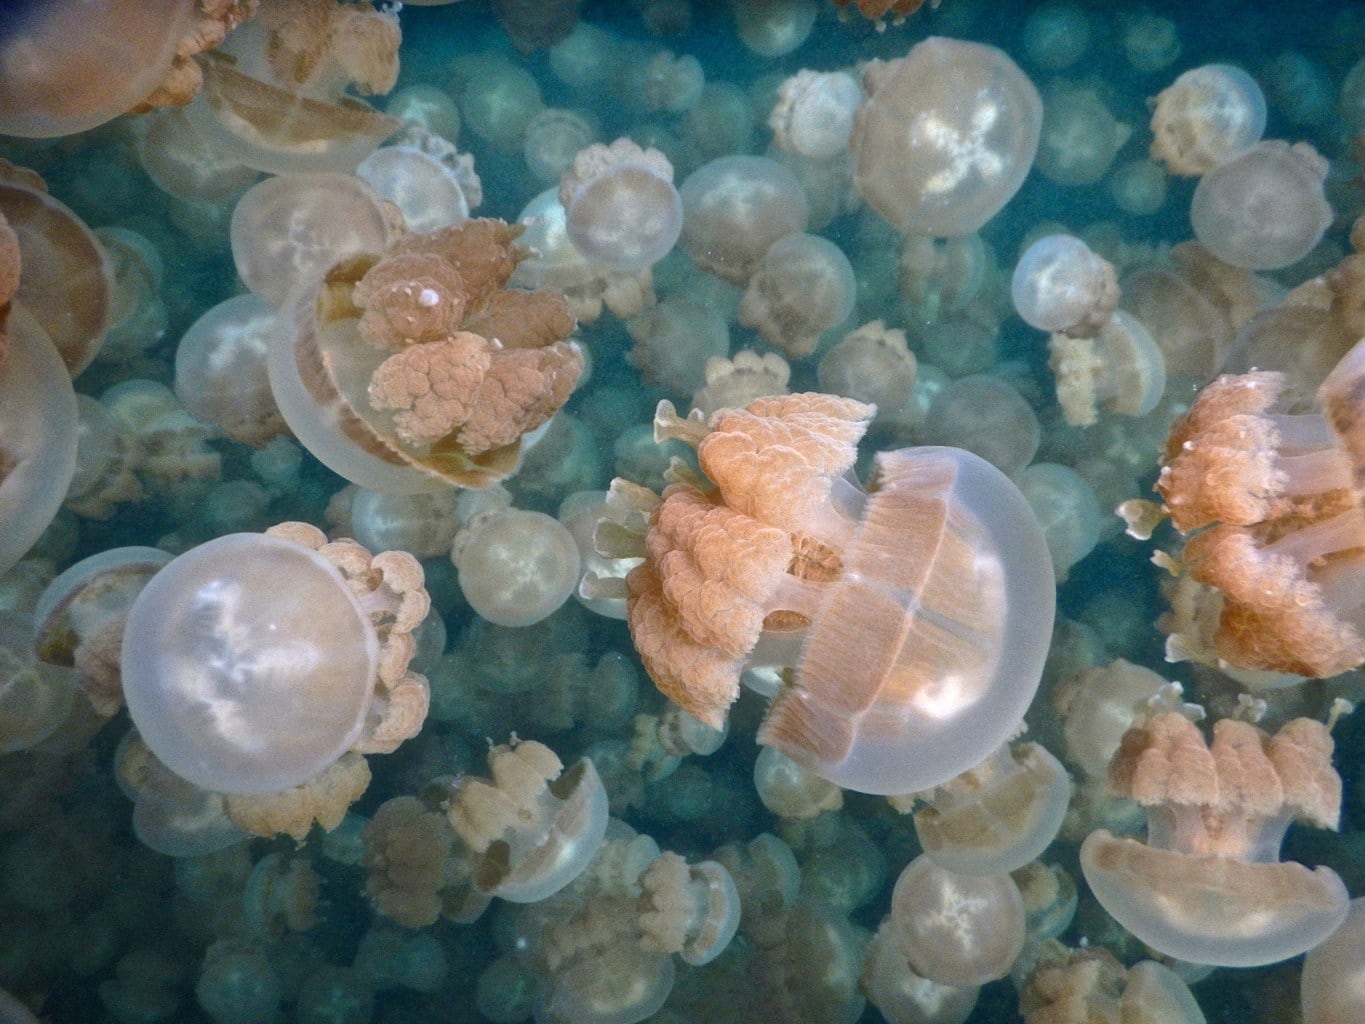 Jellyfish Lake, Palau is one of the most incredible places